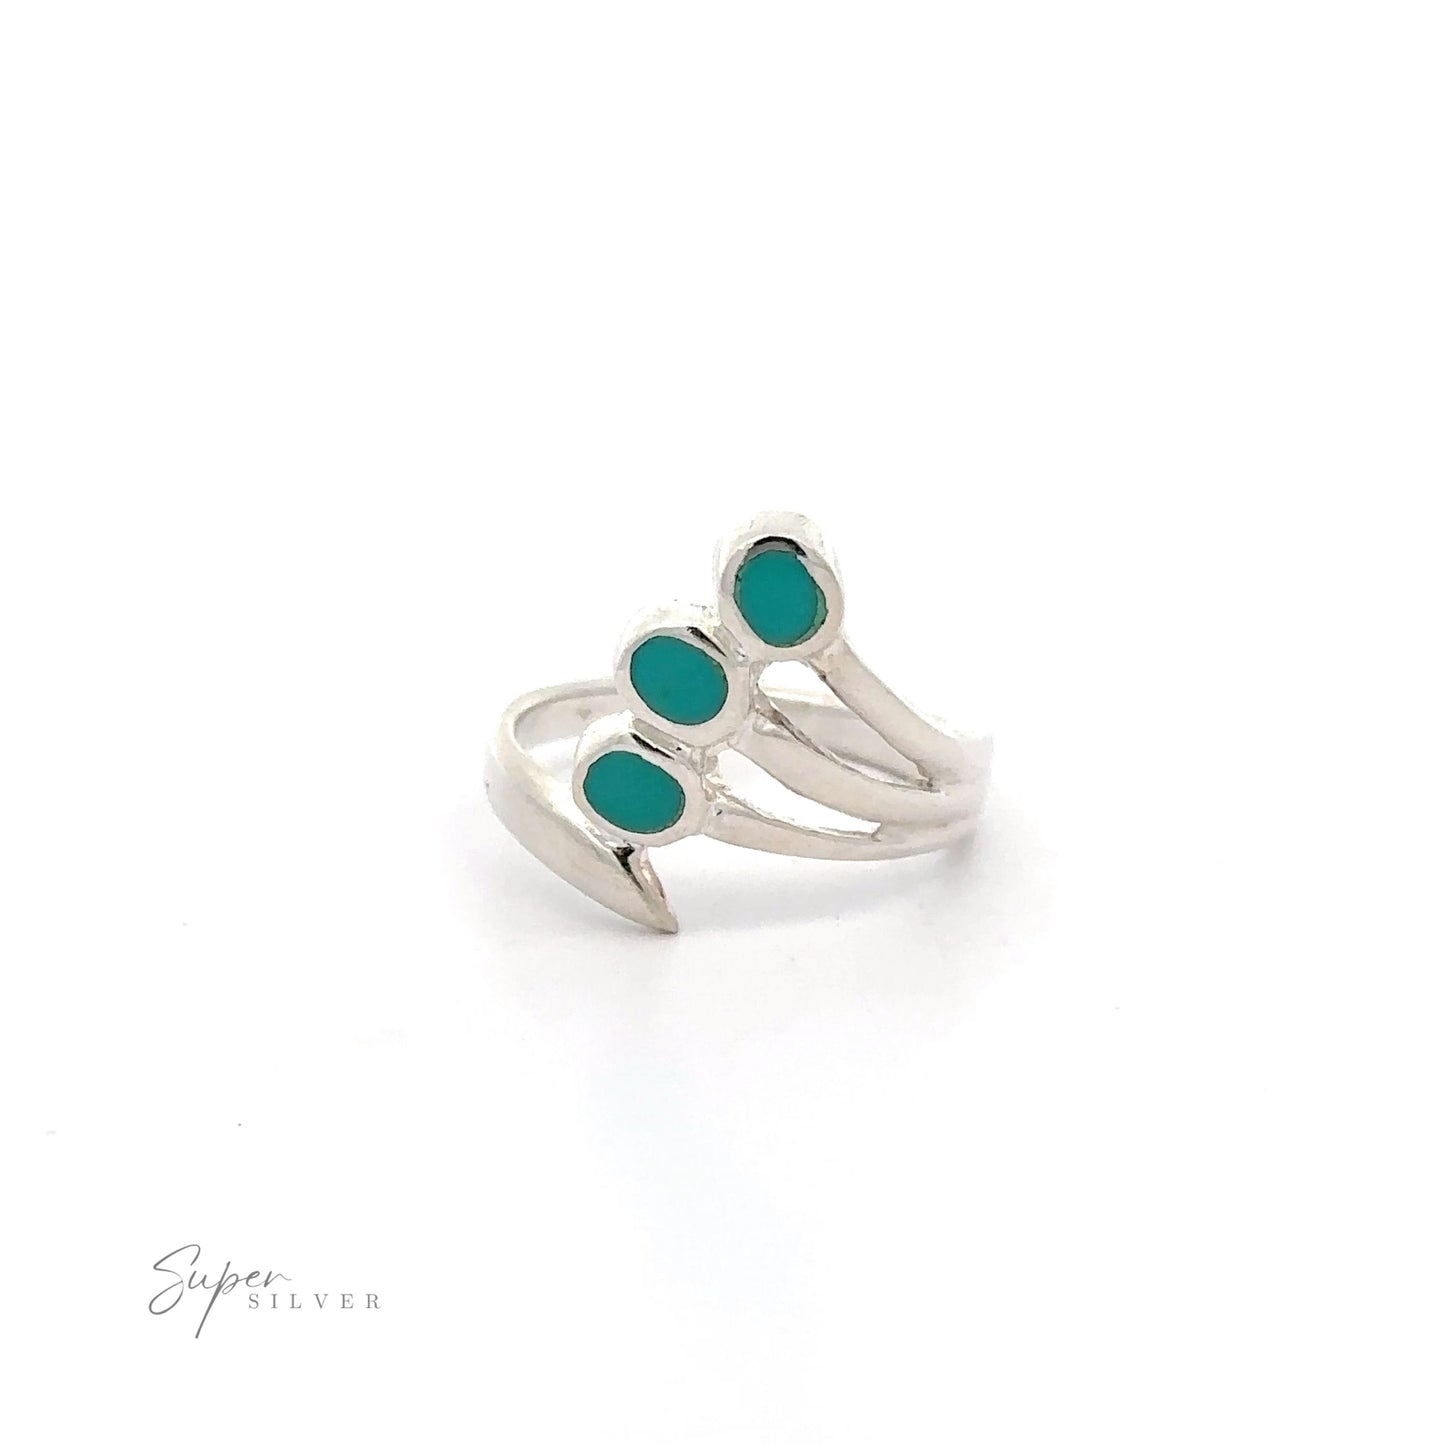 A .925 sterling silver Fanned Inlay Turquoise Ring with three inlay turquoise stones.